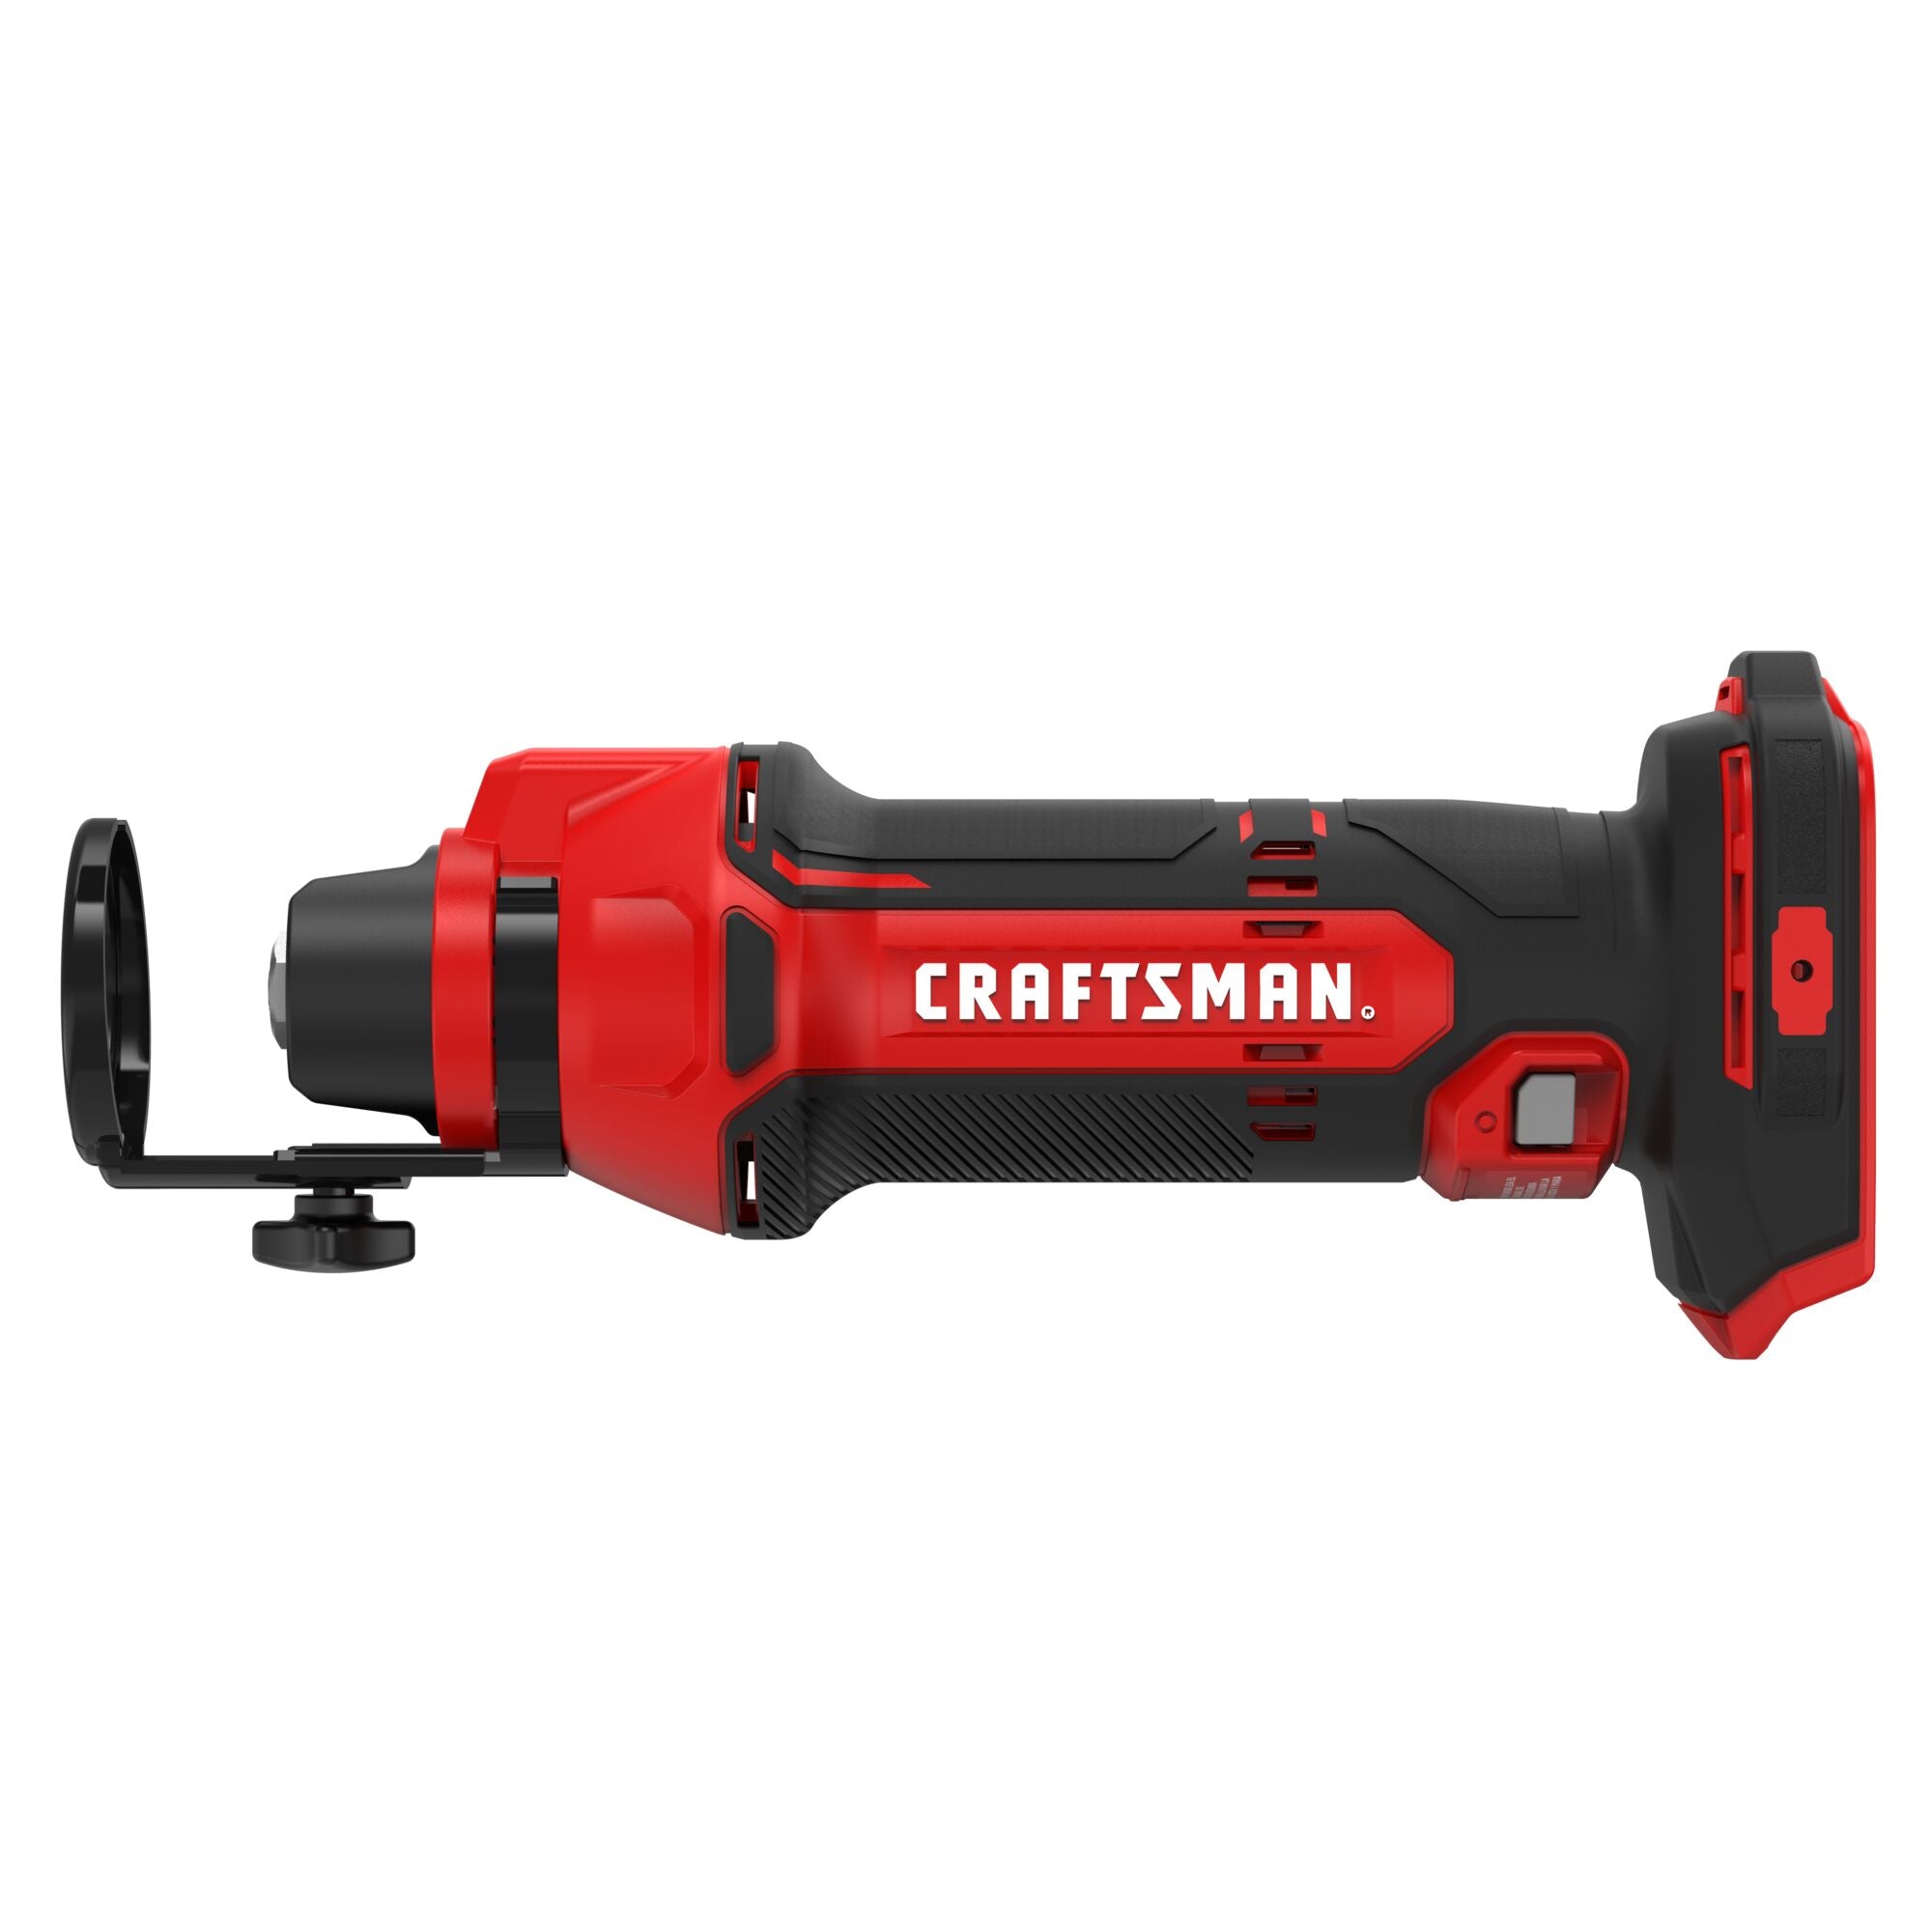 Milwaukee M12 Cordless Rotary Tool Tool Only - Ace Hardware